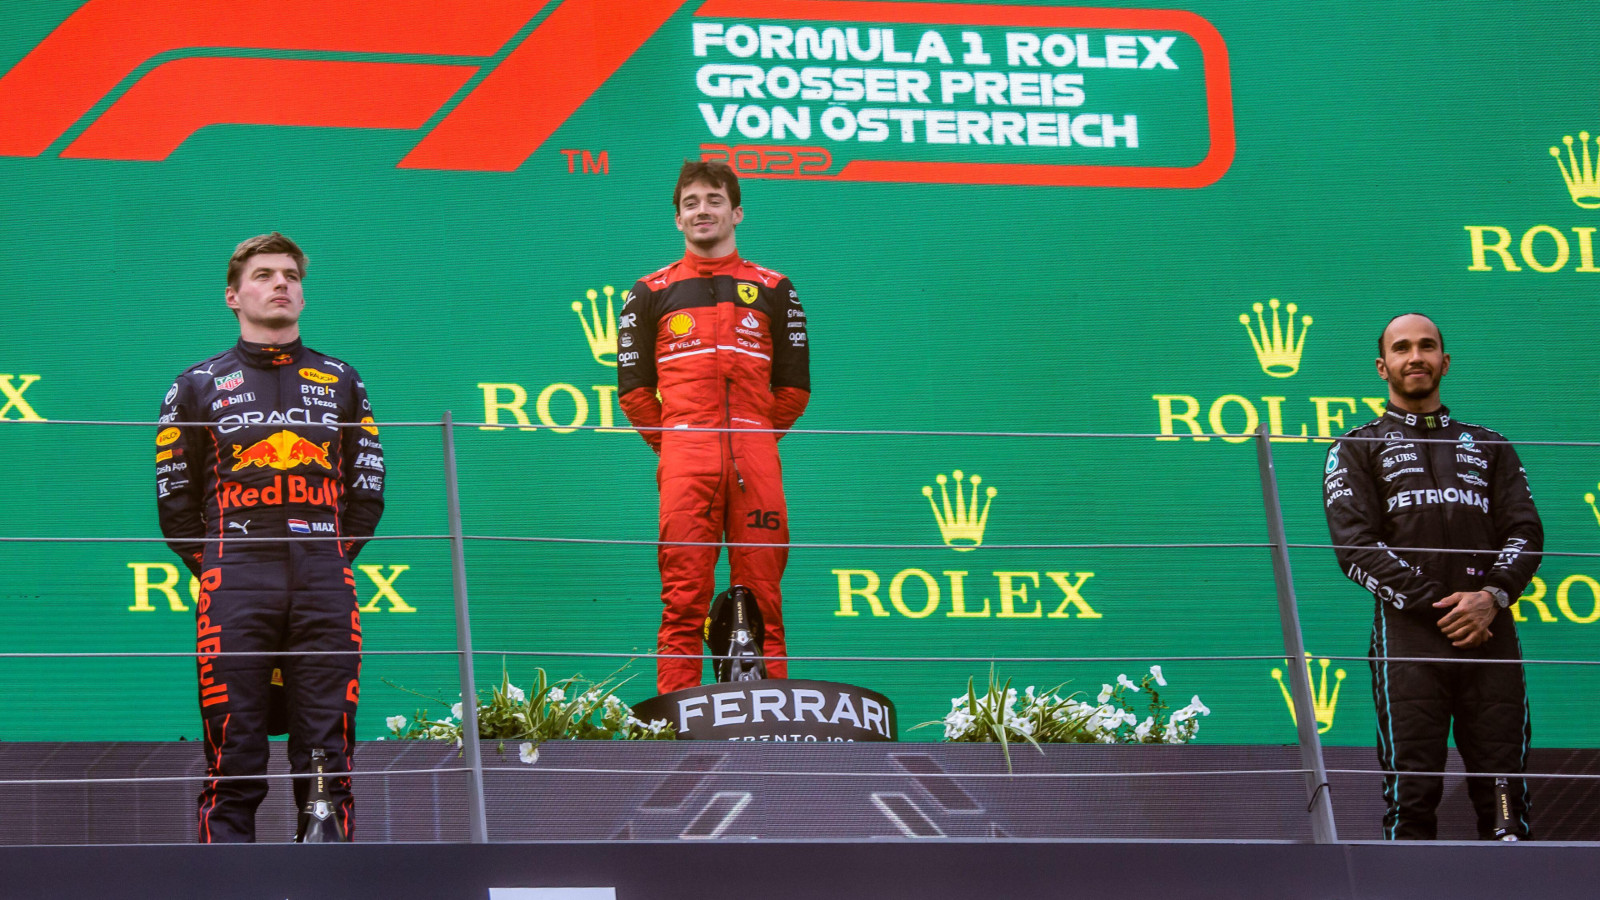 Red Bull's Max Verstappen, Ferrari's Charles Leclerc, and Mercedes' Lewis Hamilton on the podium at the Austrian Grand Prix. Spielberg, July 2022.